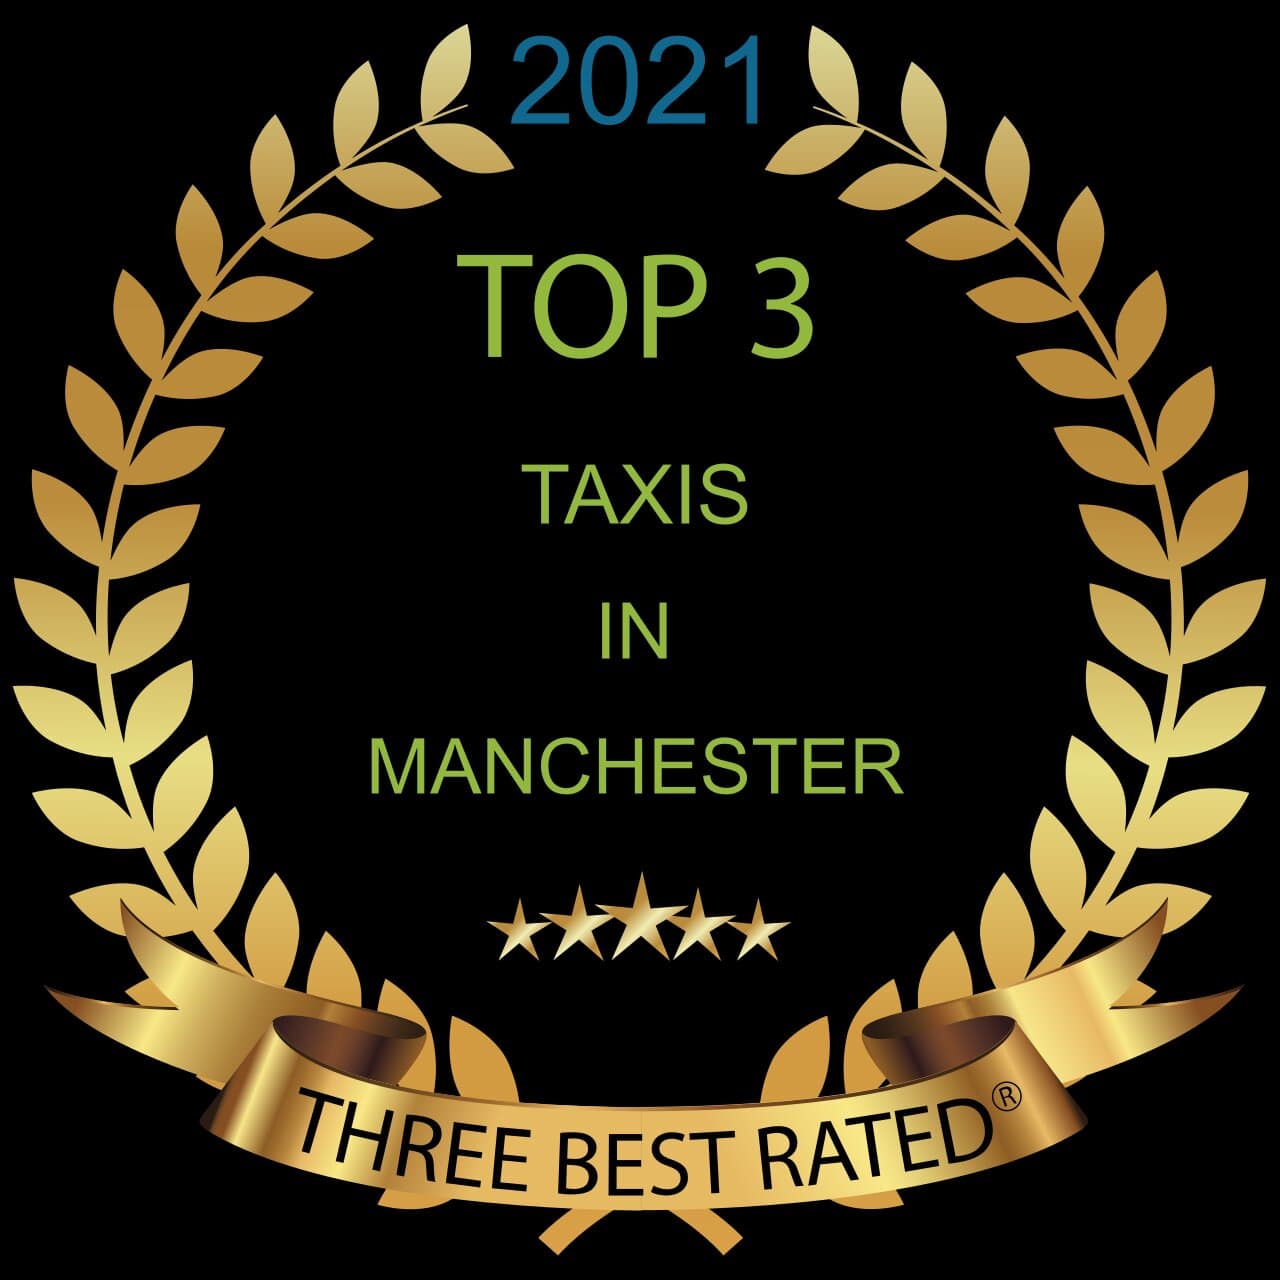 Barnsley to Manchester Airport Taxi